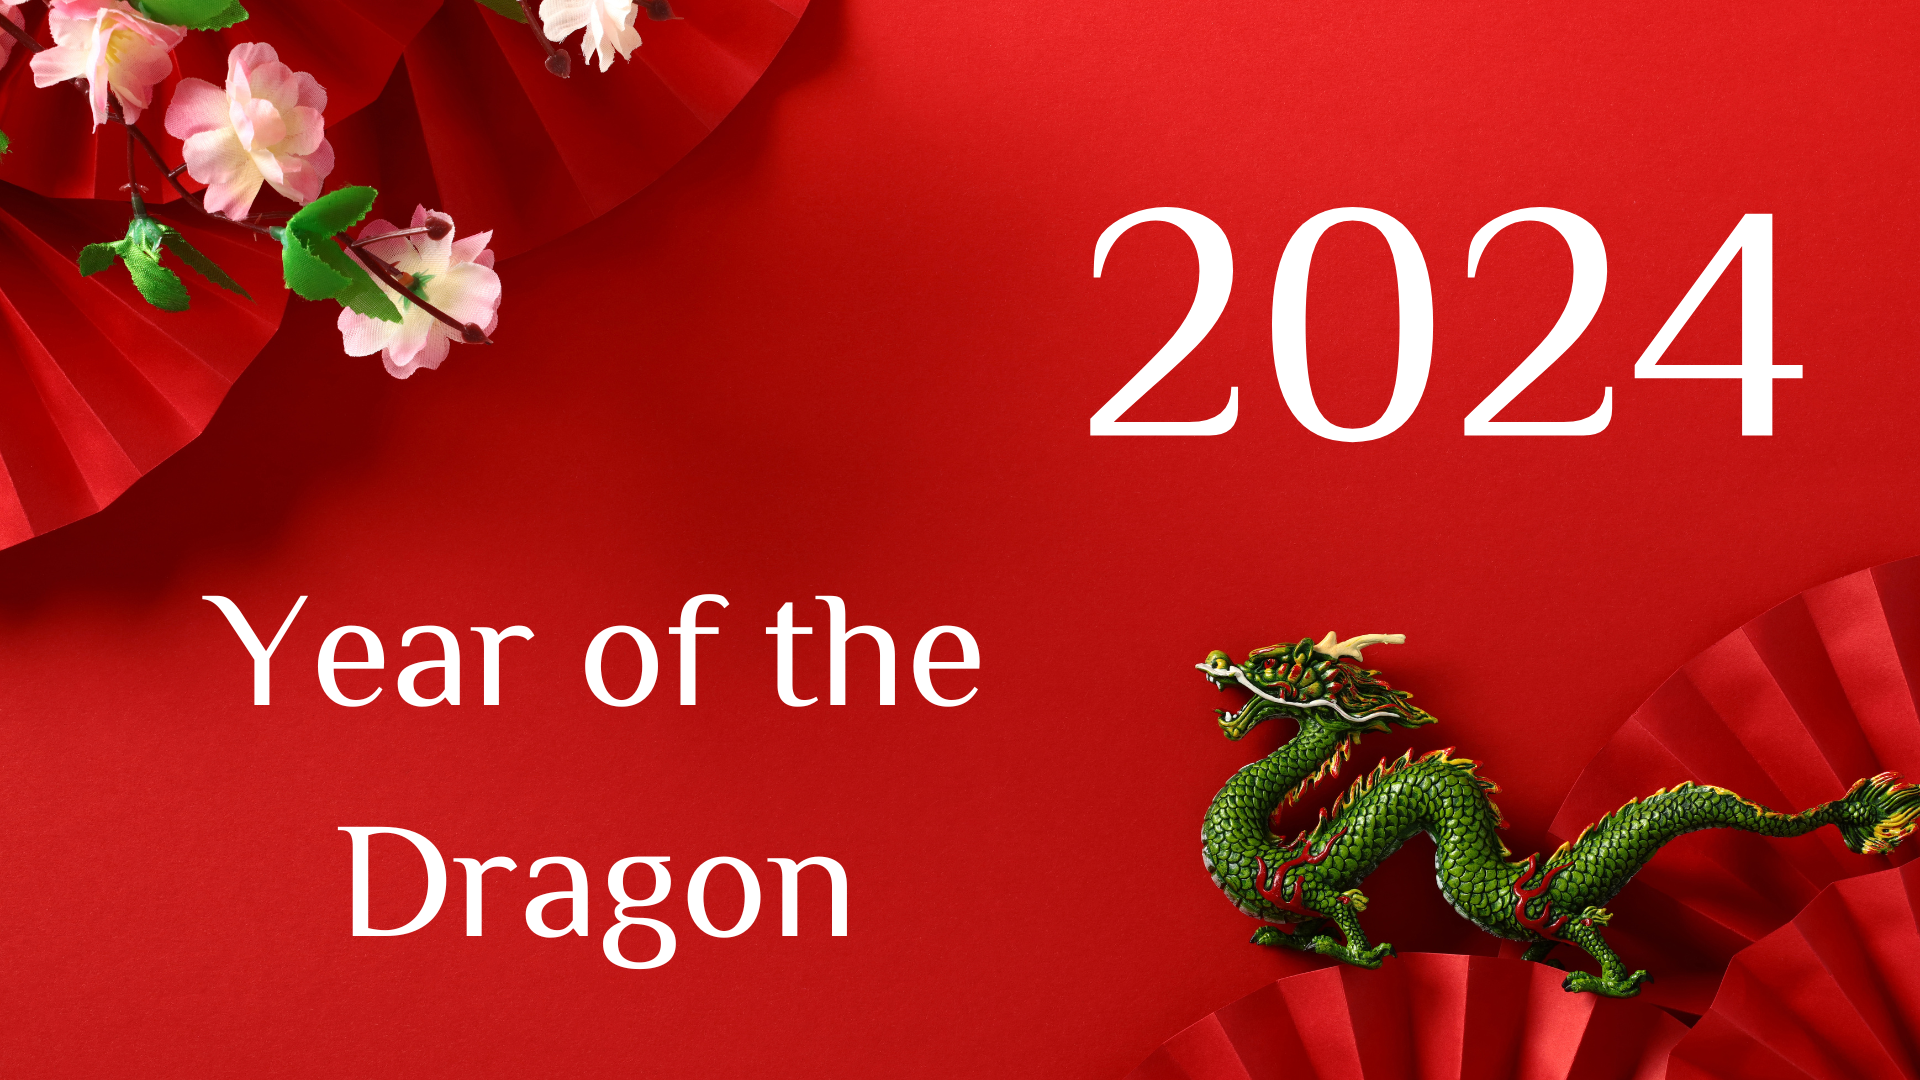 red background, with red fans, flower blossoms, and a green Chinese dragon appear in the corners.  "2024" and "Year of the Dragon".